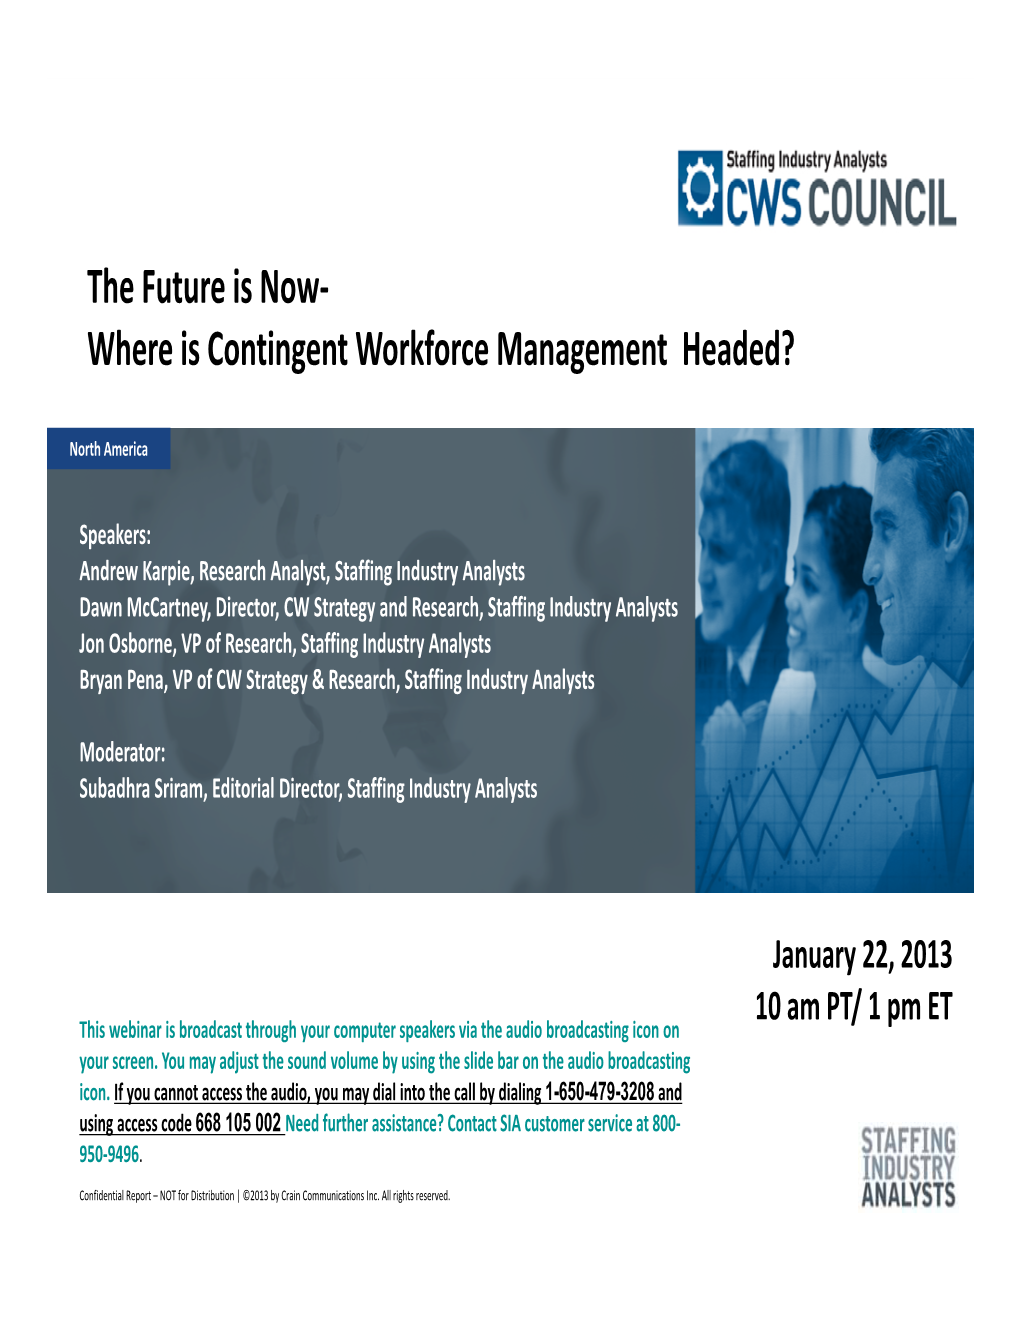 Where Is Contingent Workforce Management Headed?